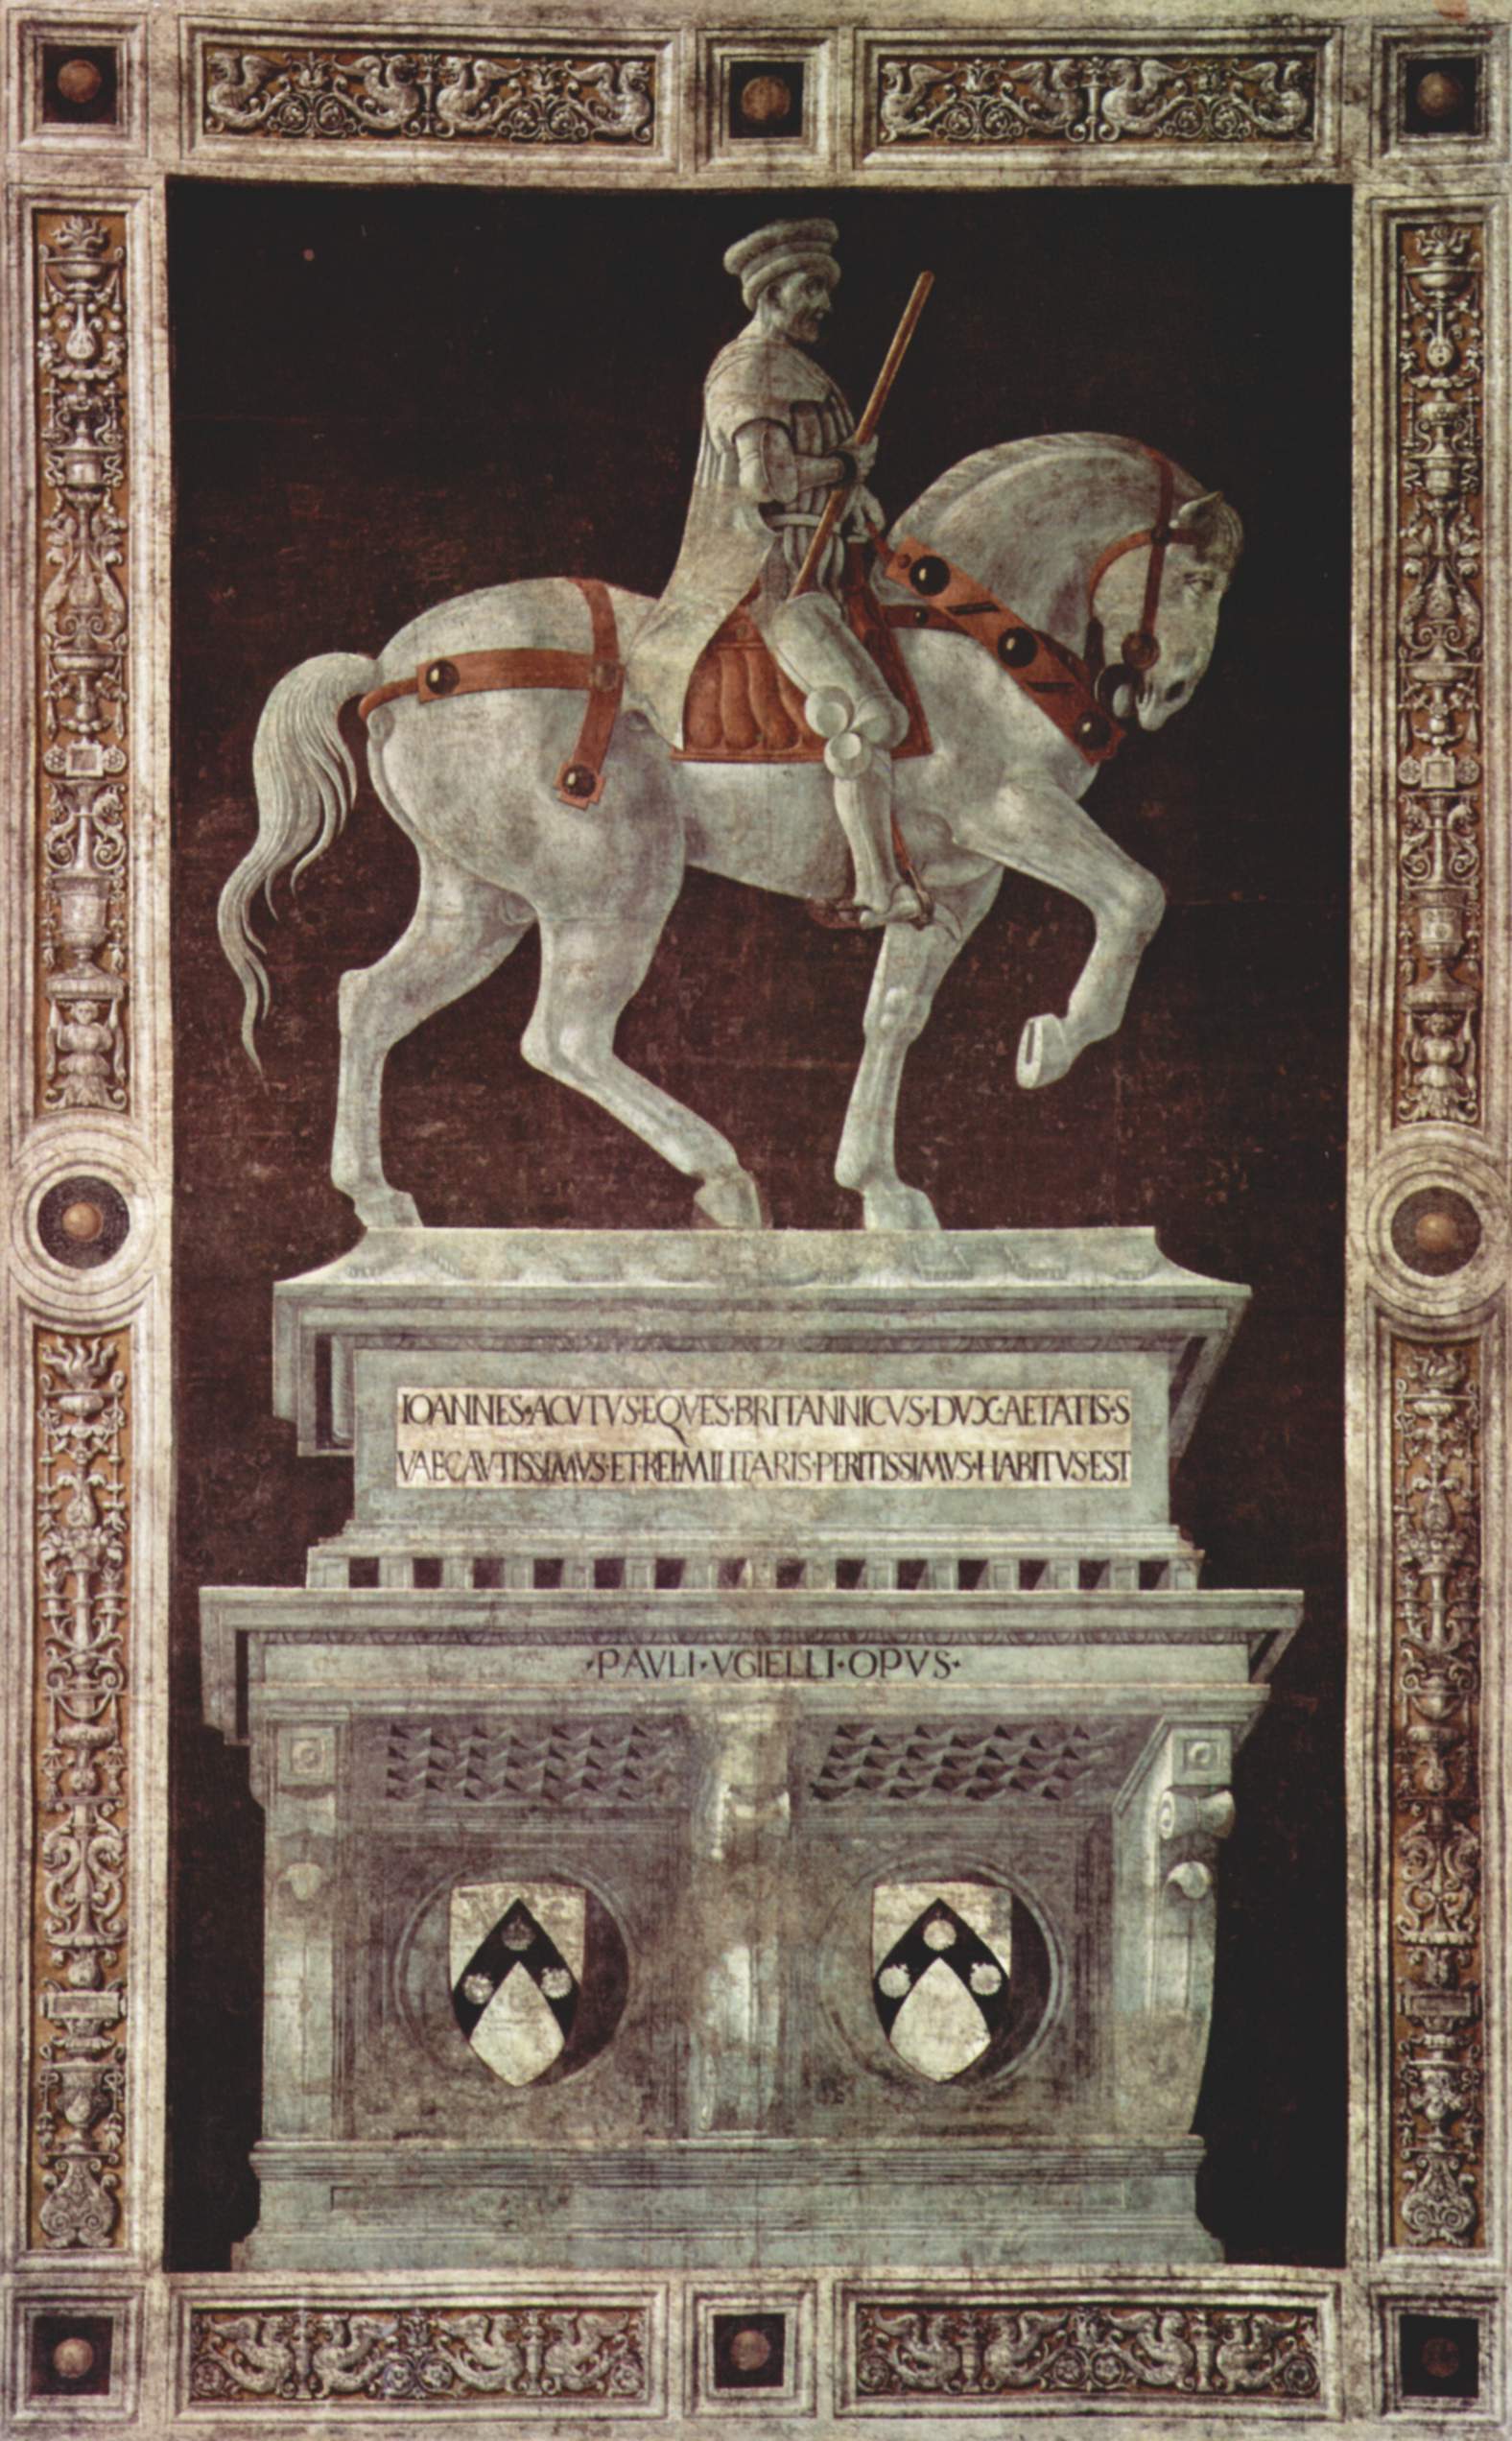 https://upload.wikimedia.org/wikipedia/commons/3/3c/Paolo_Uccello_044.jpg